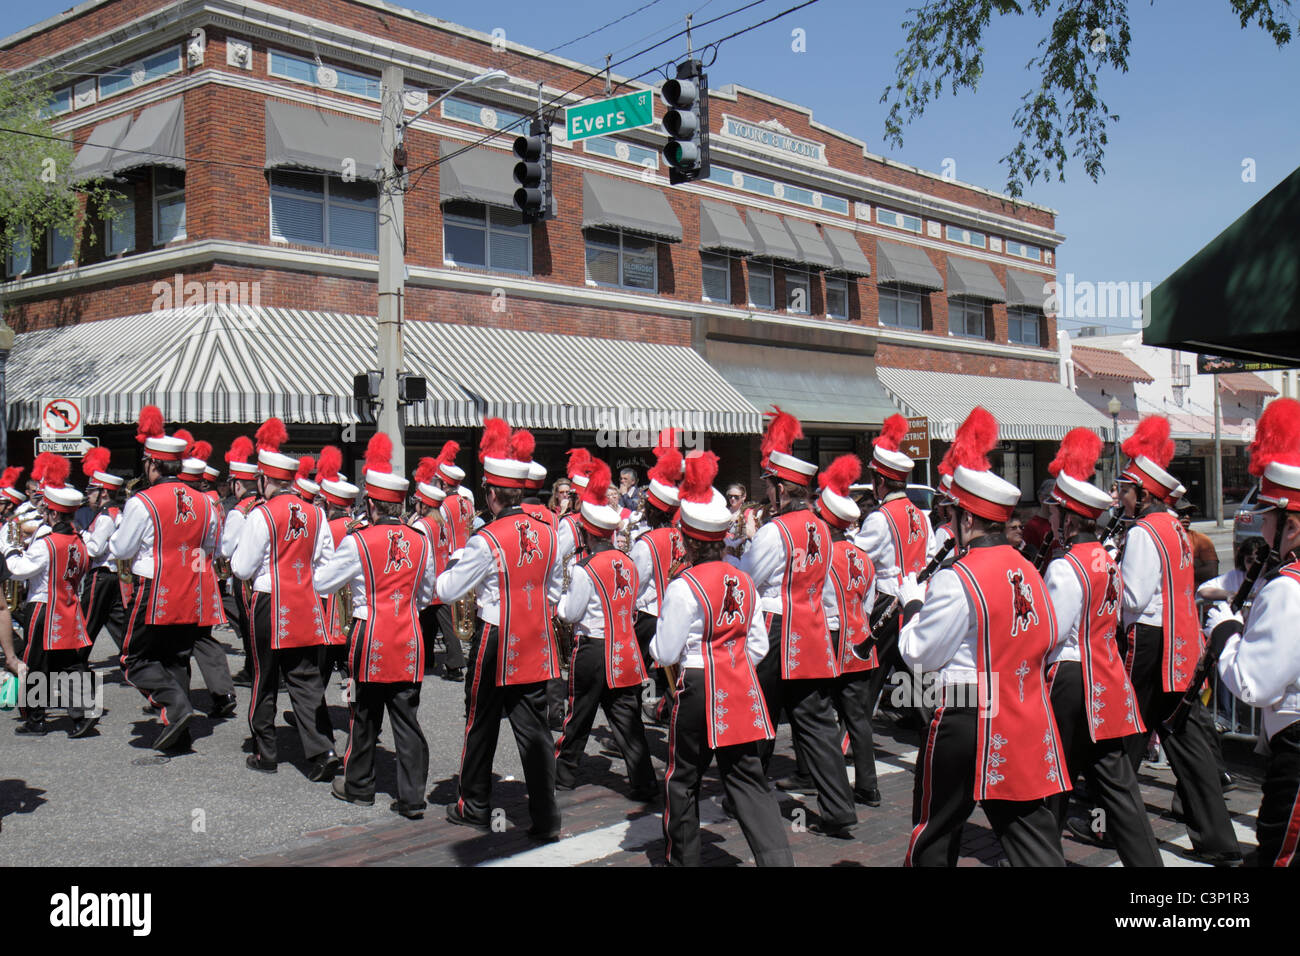 Plant City Florida,South Evers Street,Florida Strawberry Festival,Grand Parade,high school band,marching,teen teens teenage teenager teenagers youth a Stock Photo